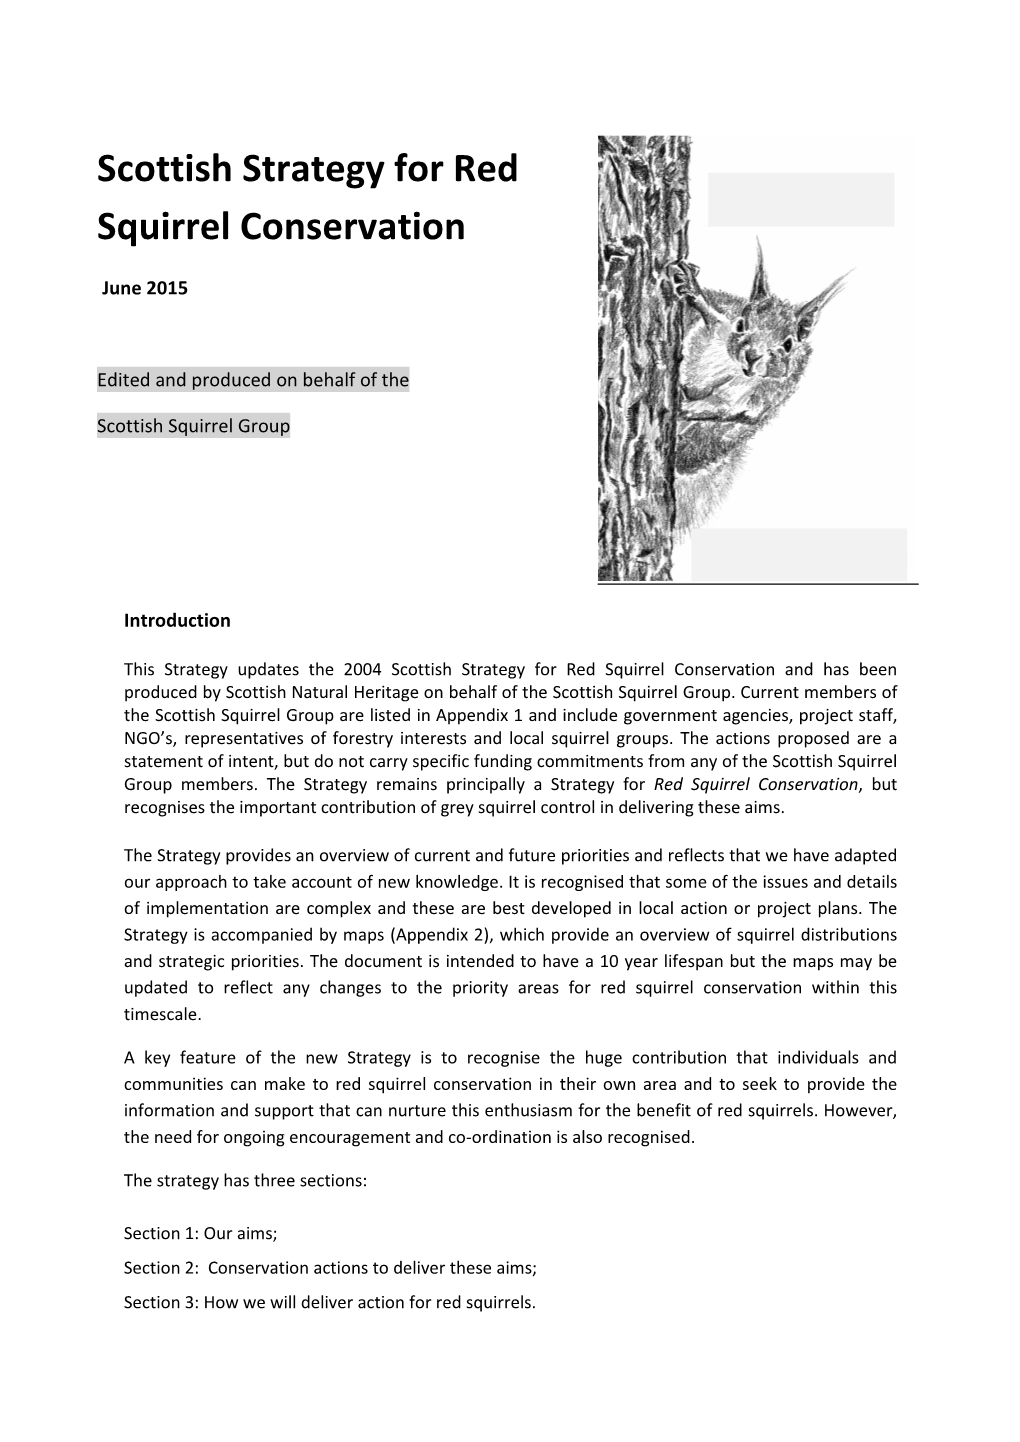 Scottish Strategy for Red Squirrel Conservation